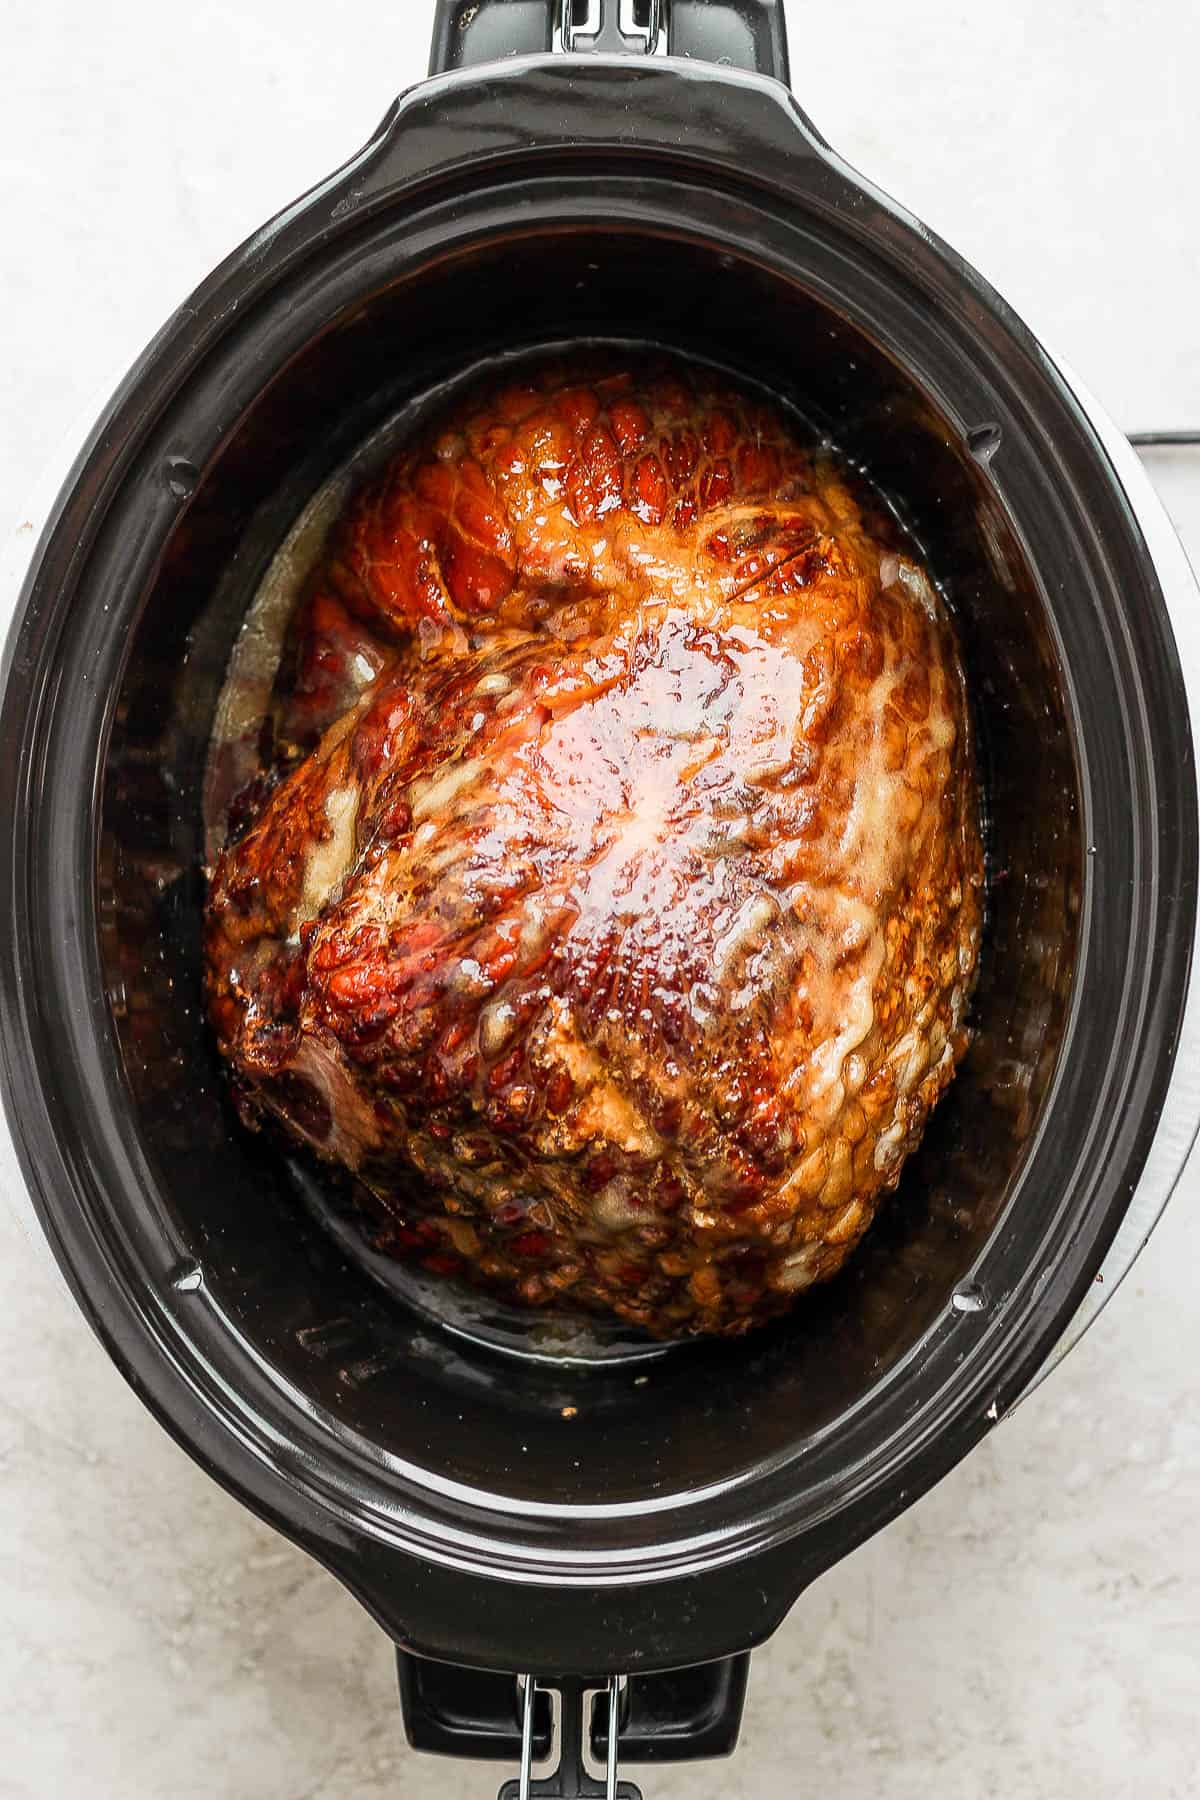 Fully cooked ham in a slow cooker.